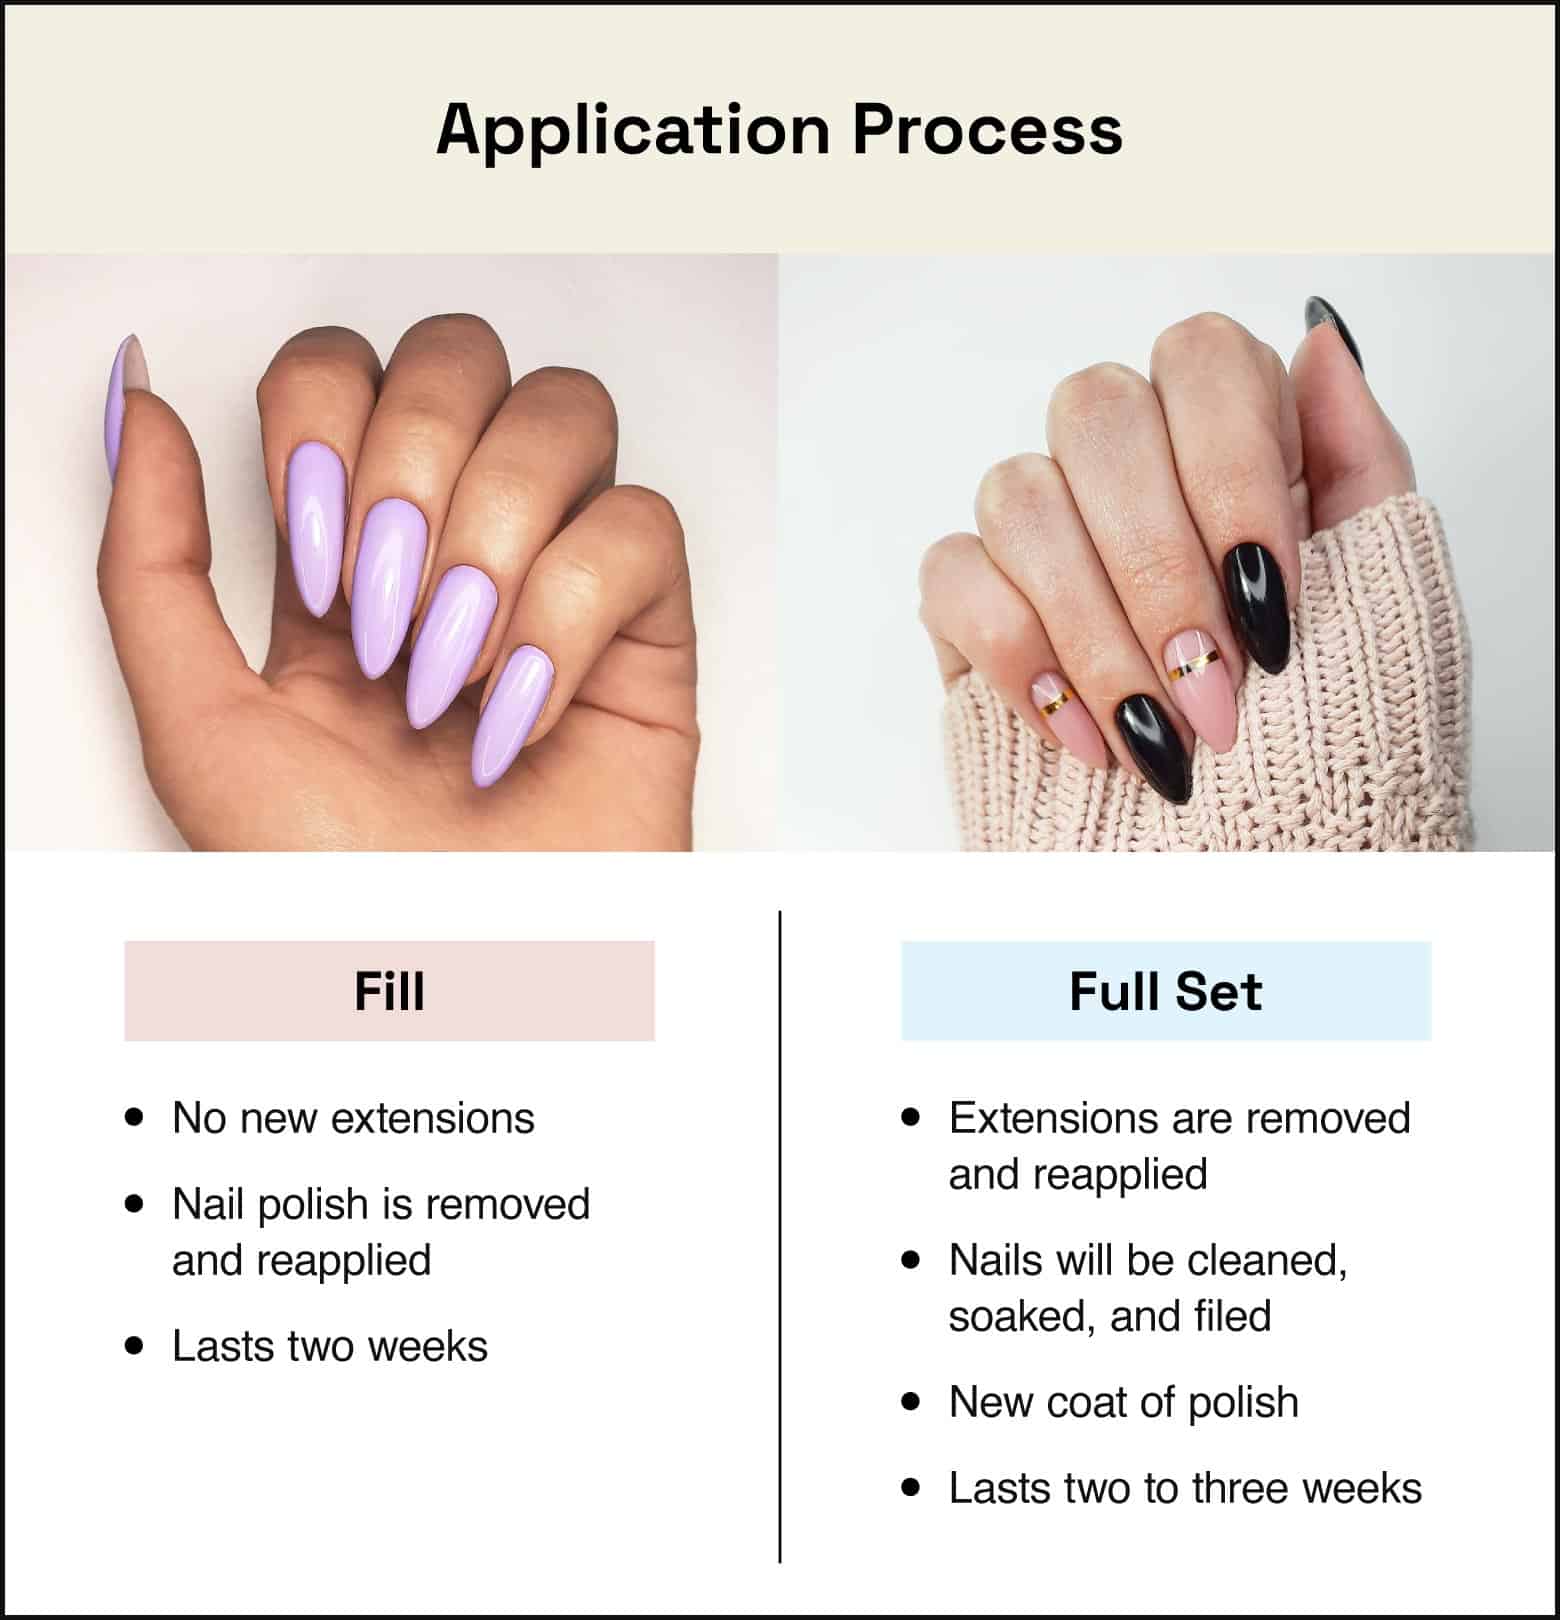 Table comparing application process between fill and full set, a fill manicure redos the polish while full sets also include new extensions and cleaned up nails